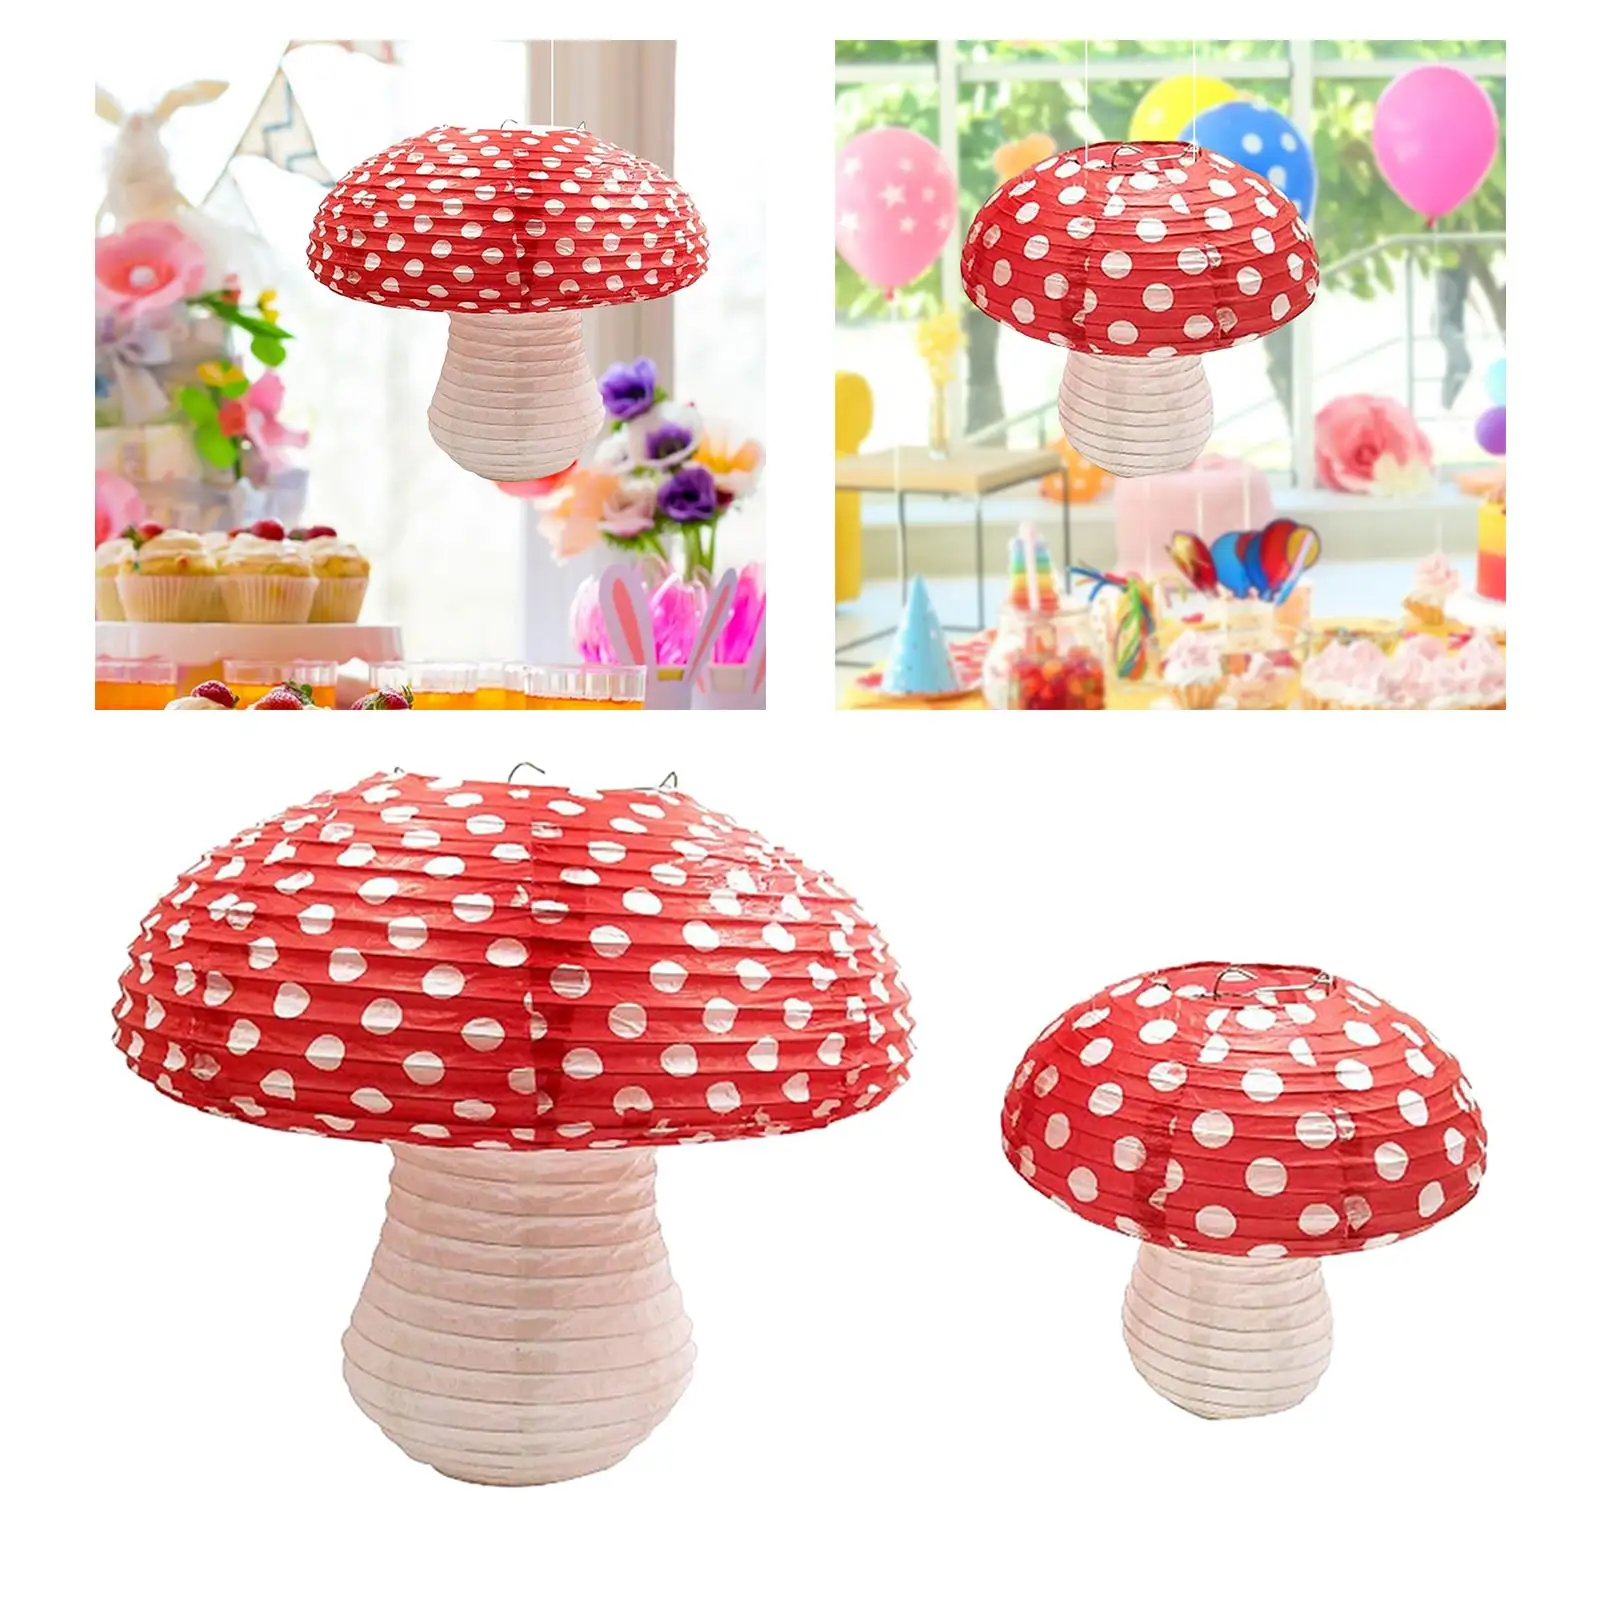 Mushroom Shaped Paper Lanterns Venue Decor Chinese Lanterns Decorative Party Favors for Garden Valentine Wedding Party Gifts